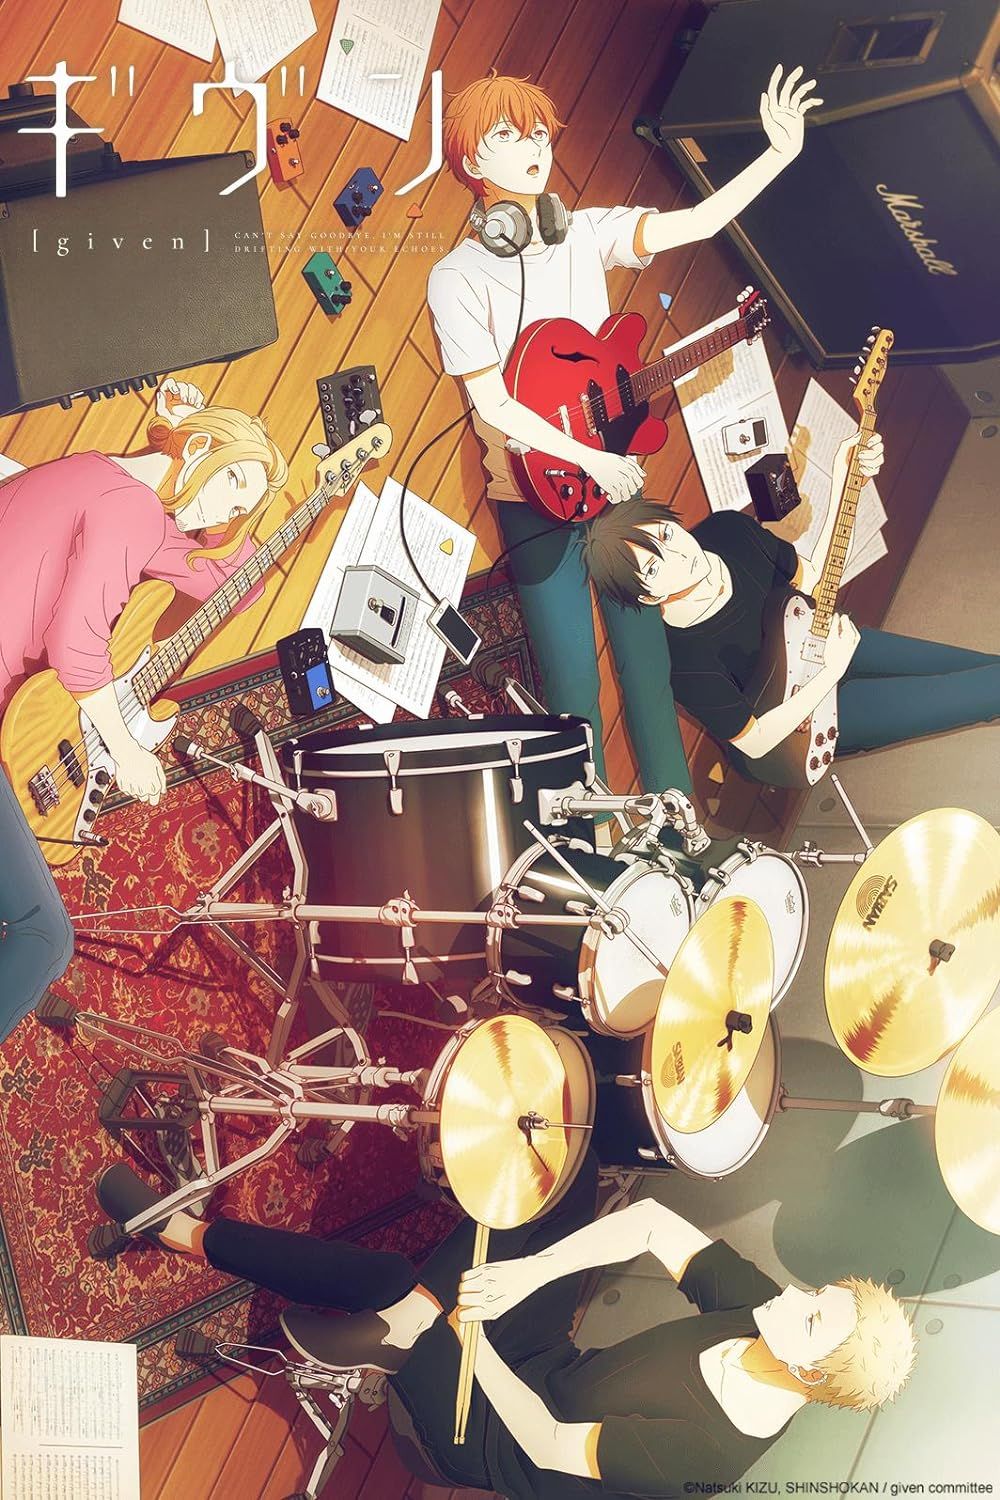 Mafuyu, Ritsuka, and Haruki laying in the floor with their instruments while Akihiko sits at his drums in Given